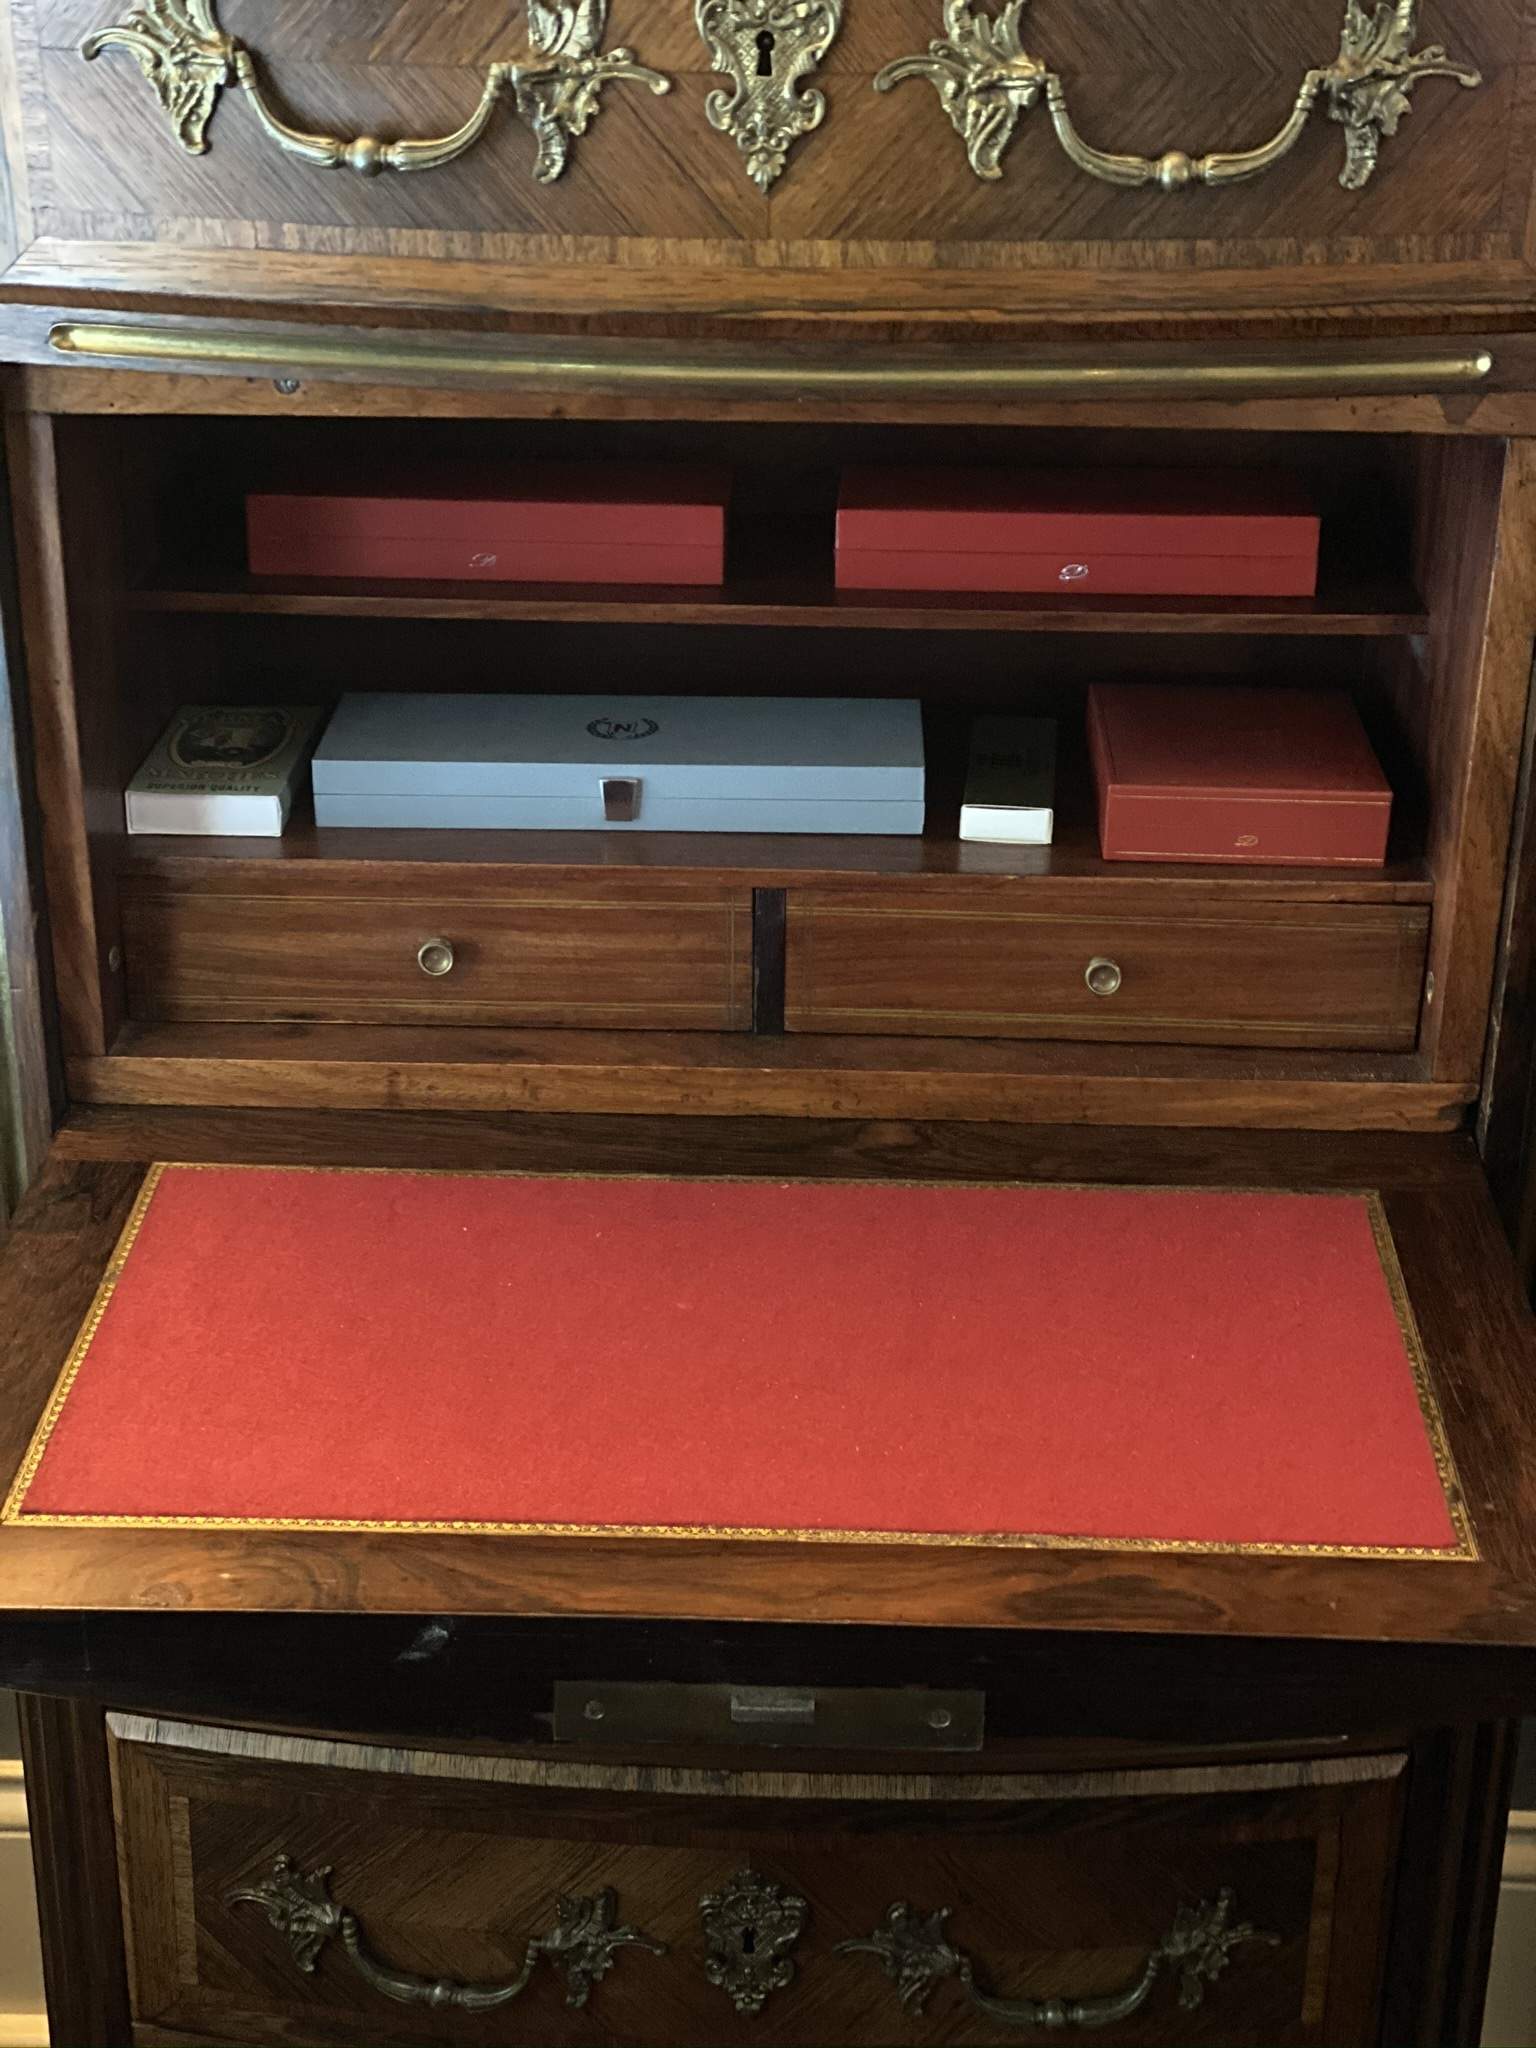 Extra Cabinet for Storage with Hidden Secretary